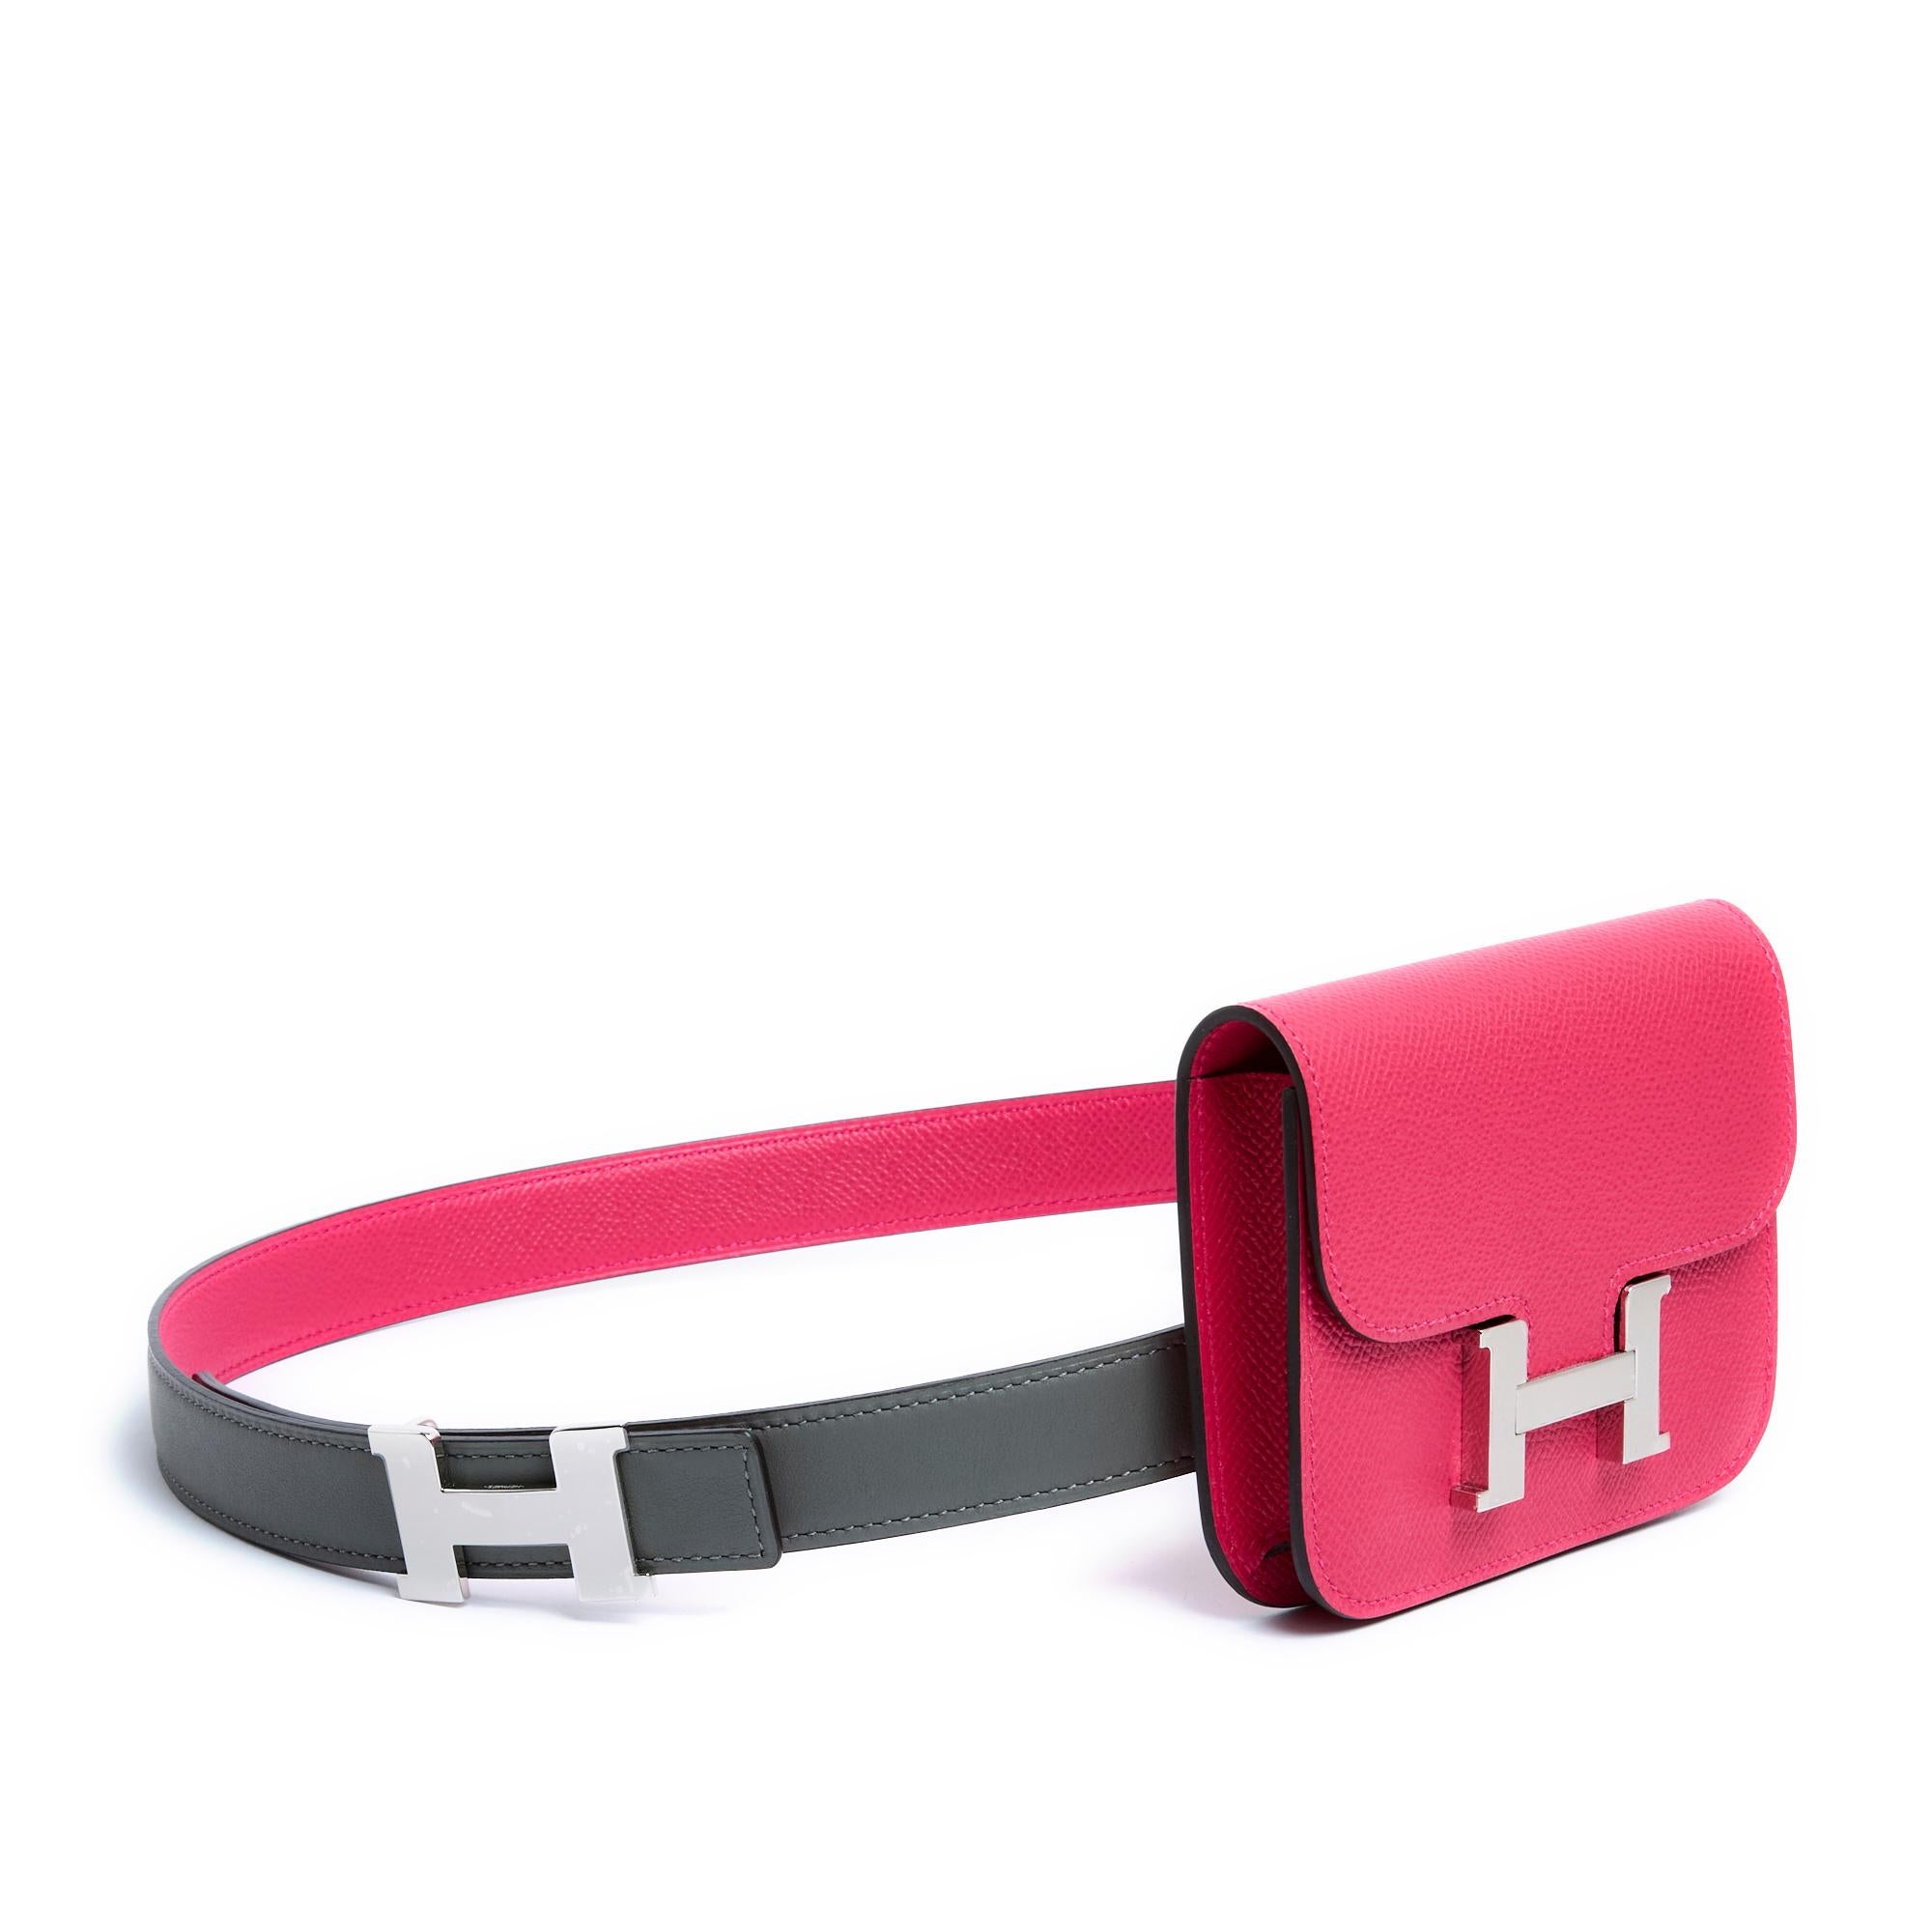 Hermès clutch, Constance Slim model, in pink (Mexico) Epsom leather, interior in smooth pink leather and coordinated removable coin purse, H click clasp in shiny silver metal (palladium), a wide belt loop on the back and its matching belt, series A